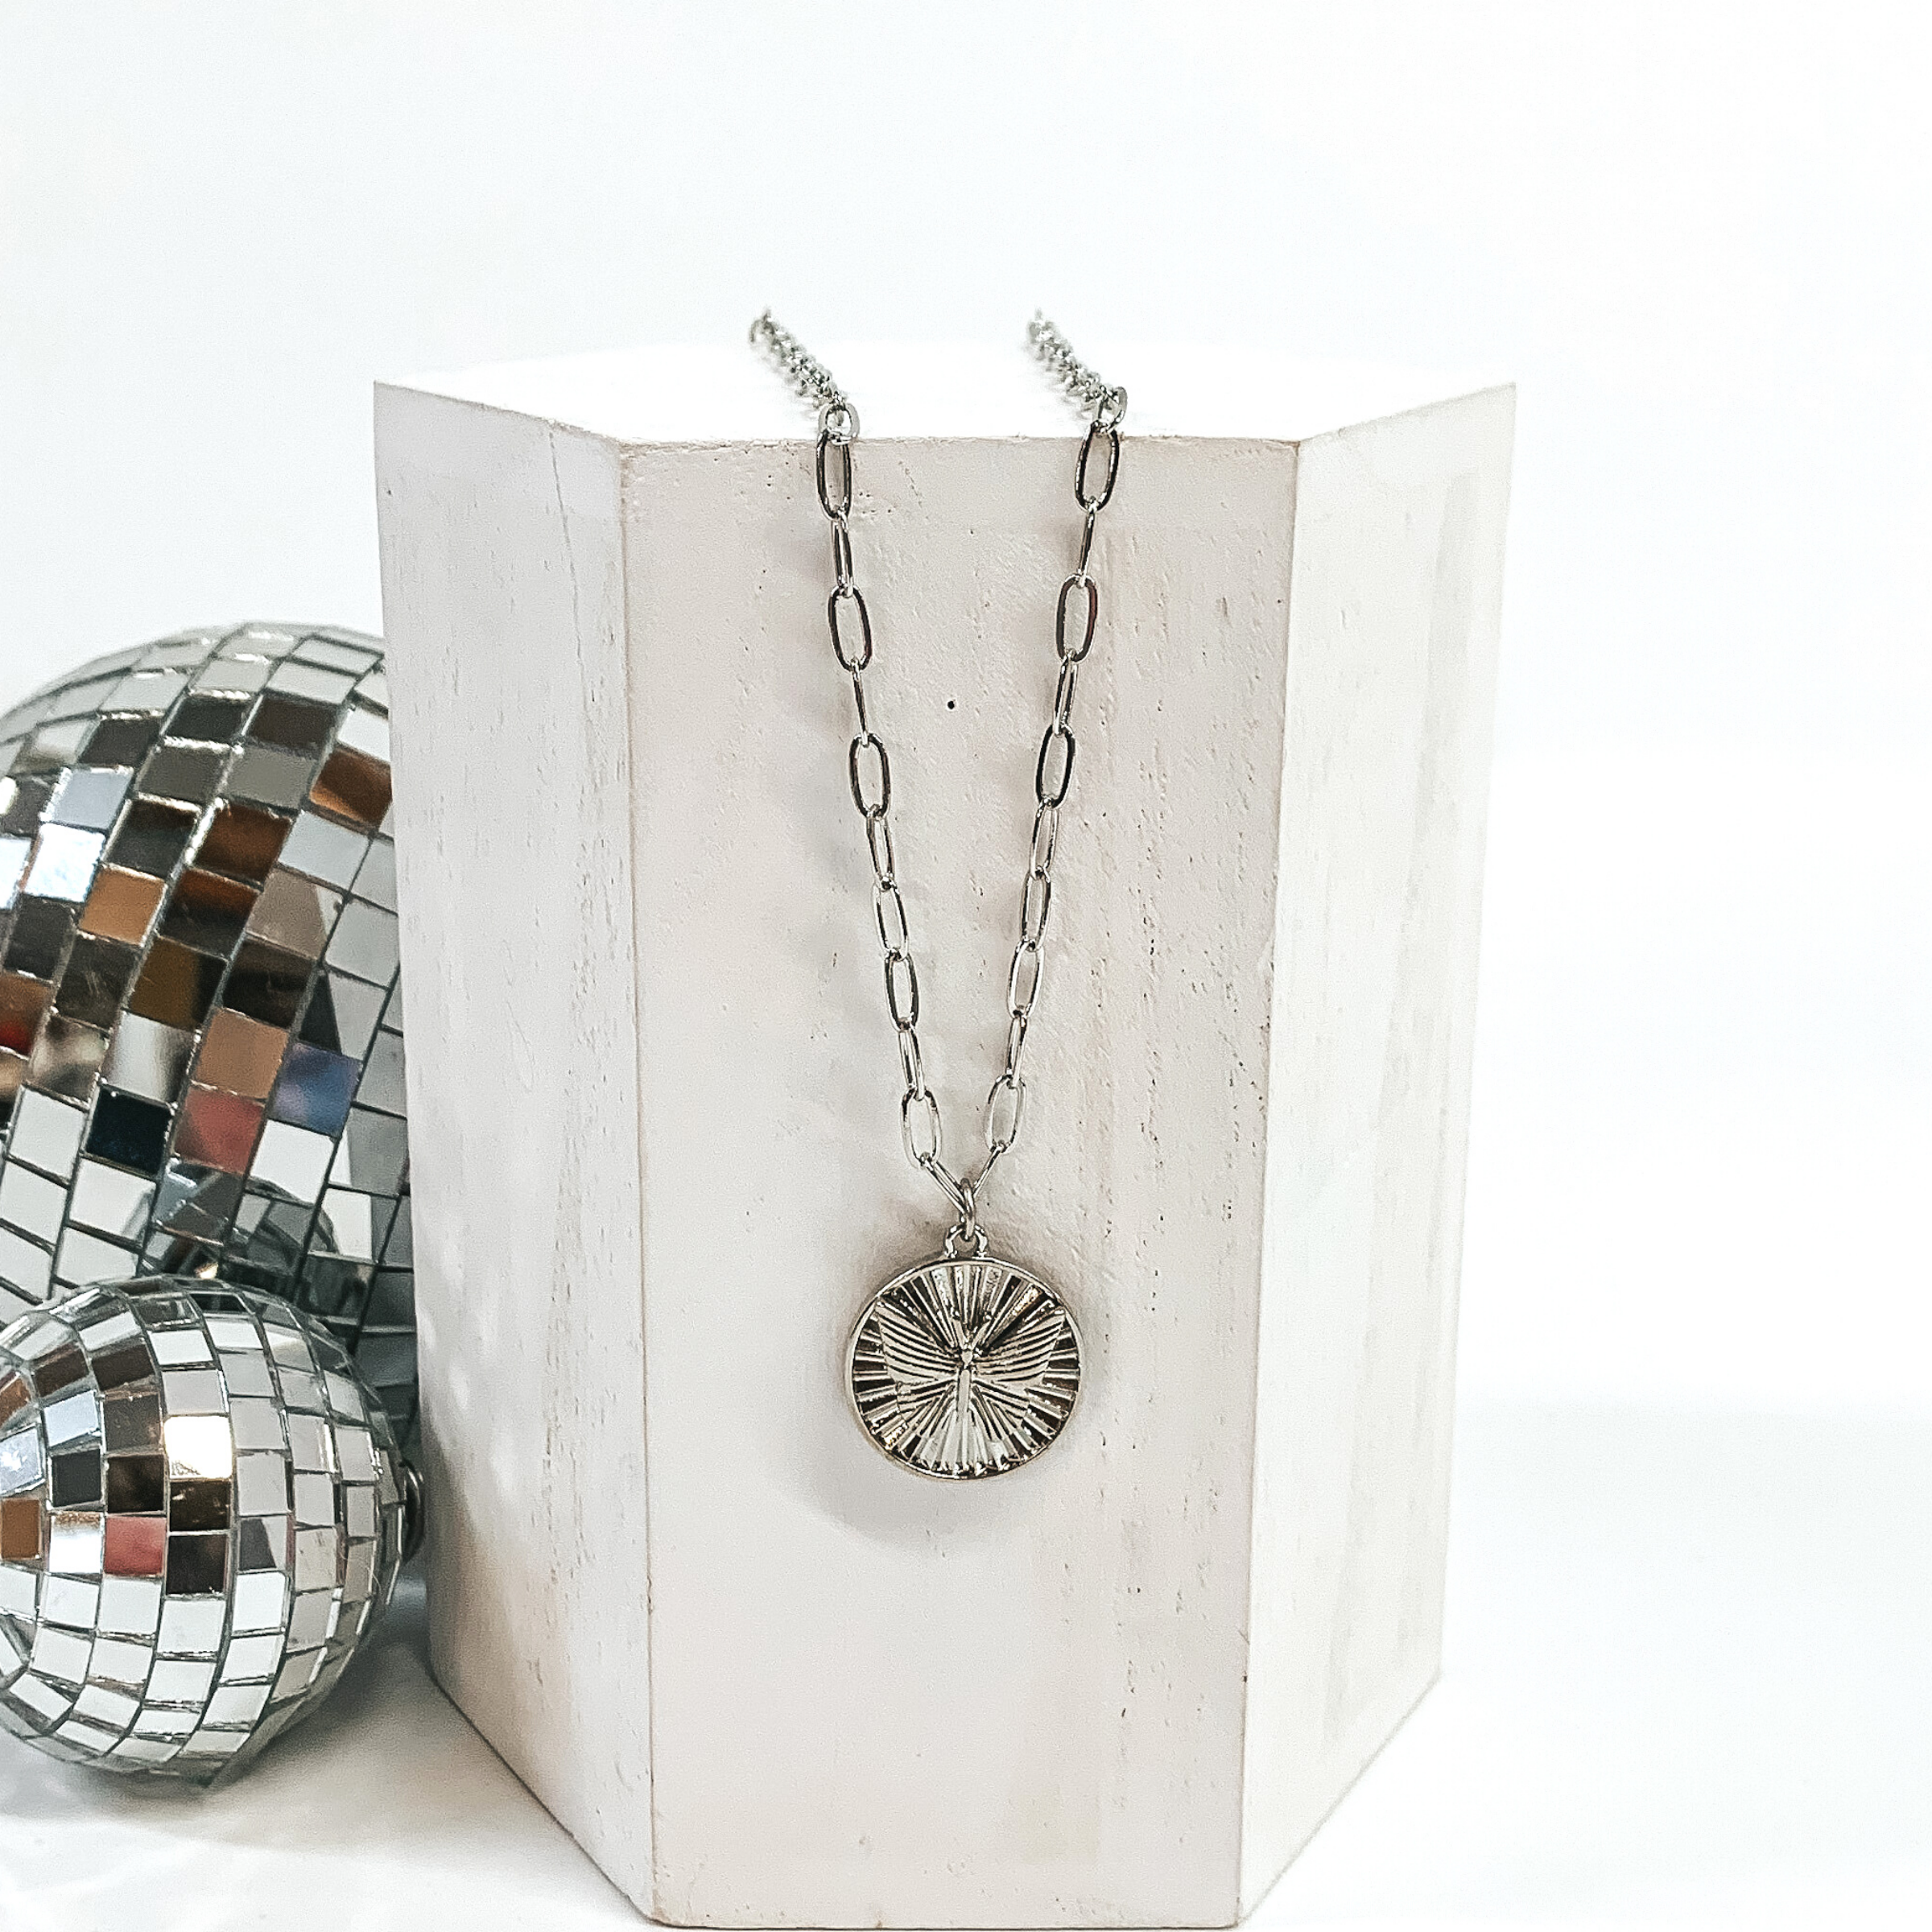 This is a silver necklace with a shell textured circle pendant and a butterfly charm on the front of the circle pendant. This necklace is pictured laying on a white block and on a white background with disco balls on the left side of the block.